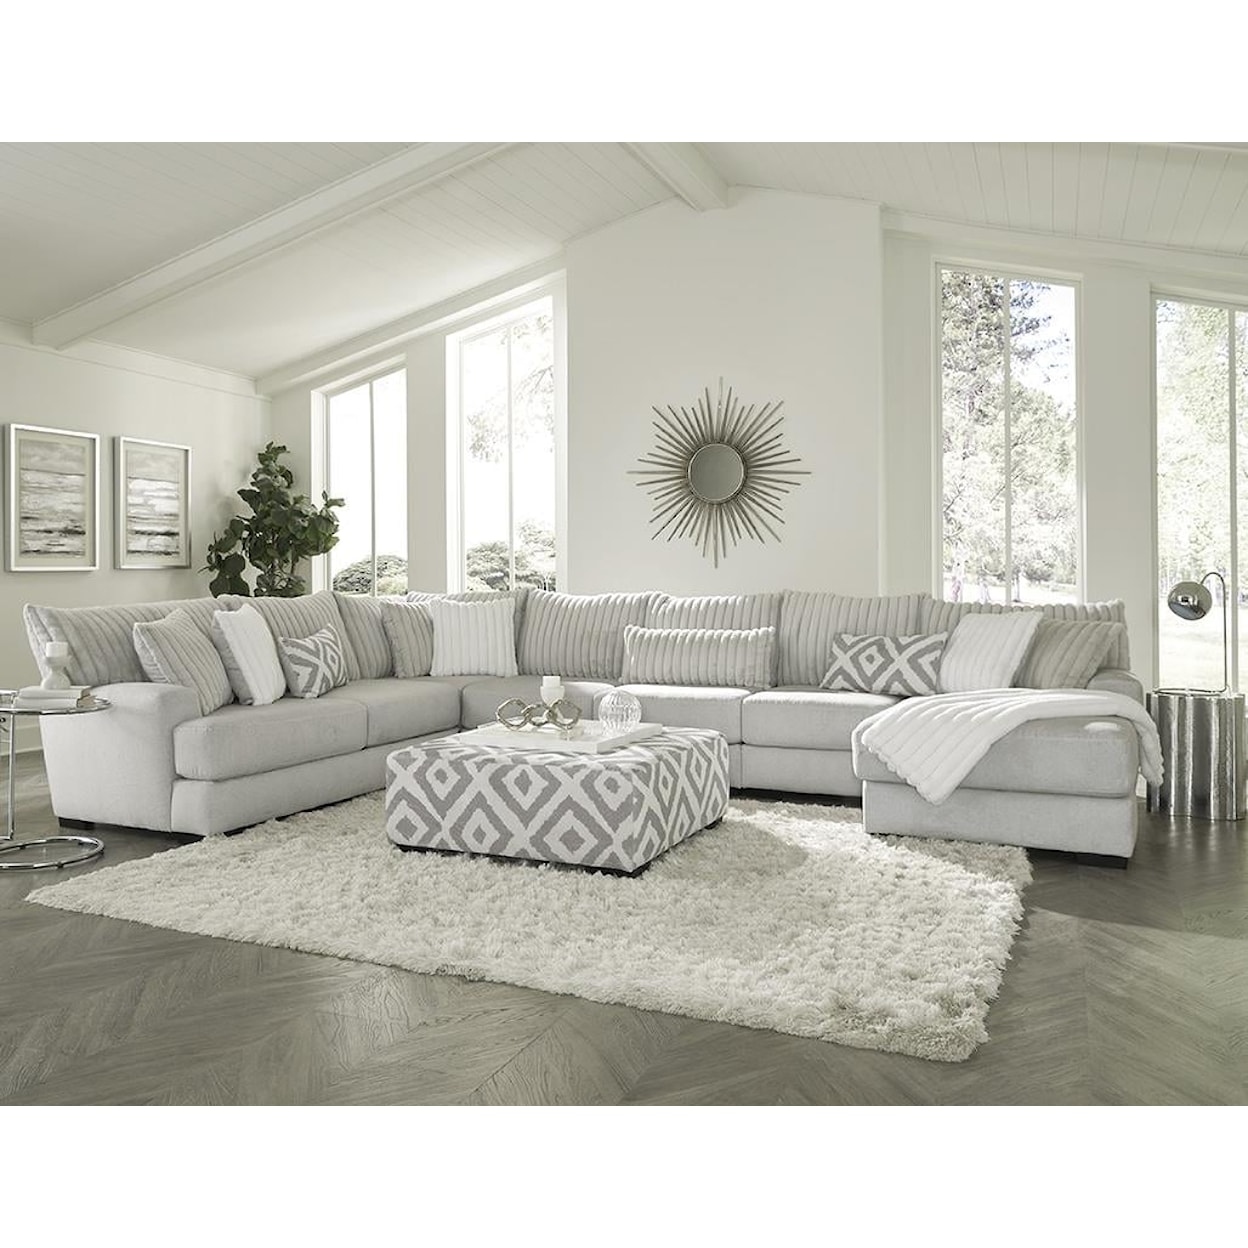 Albany 938 Tweed Silver 4-Piece Sectional Sofa